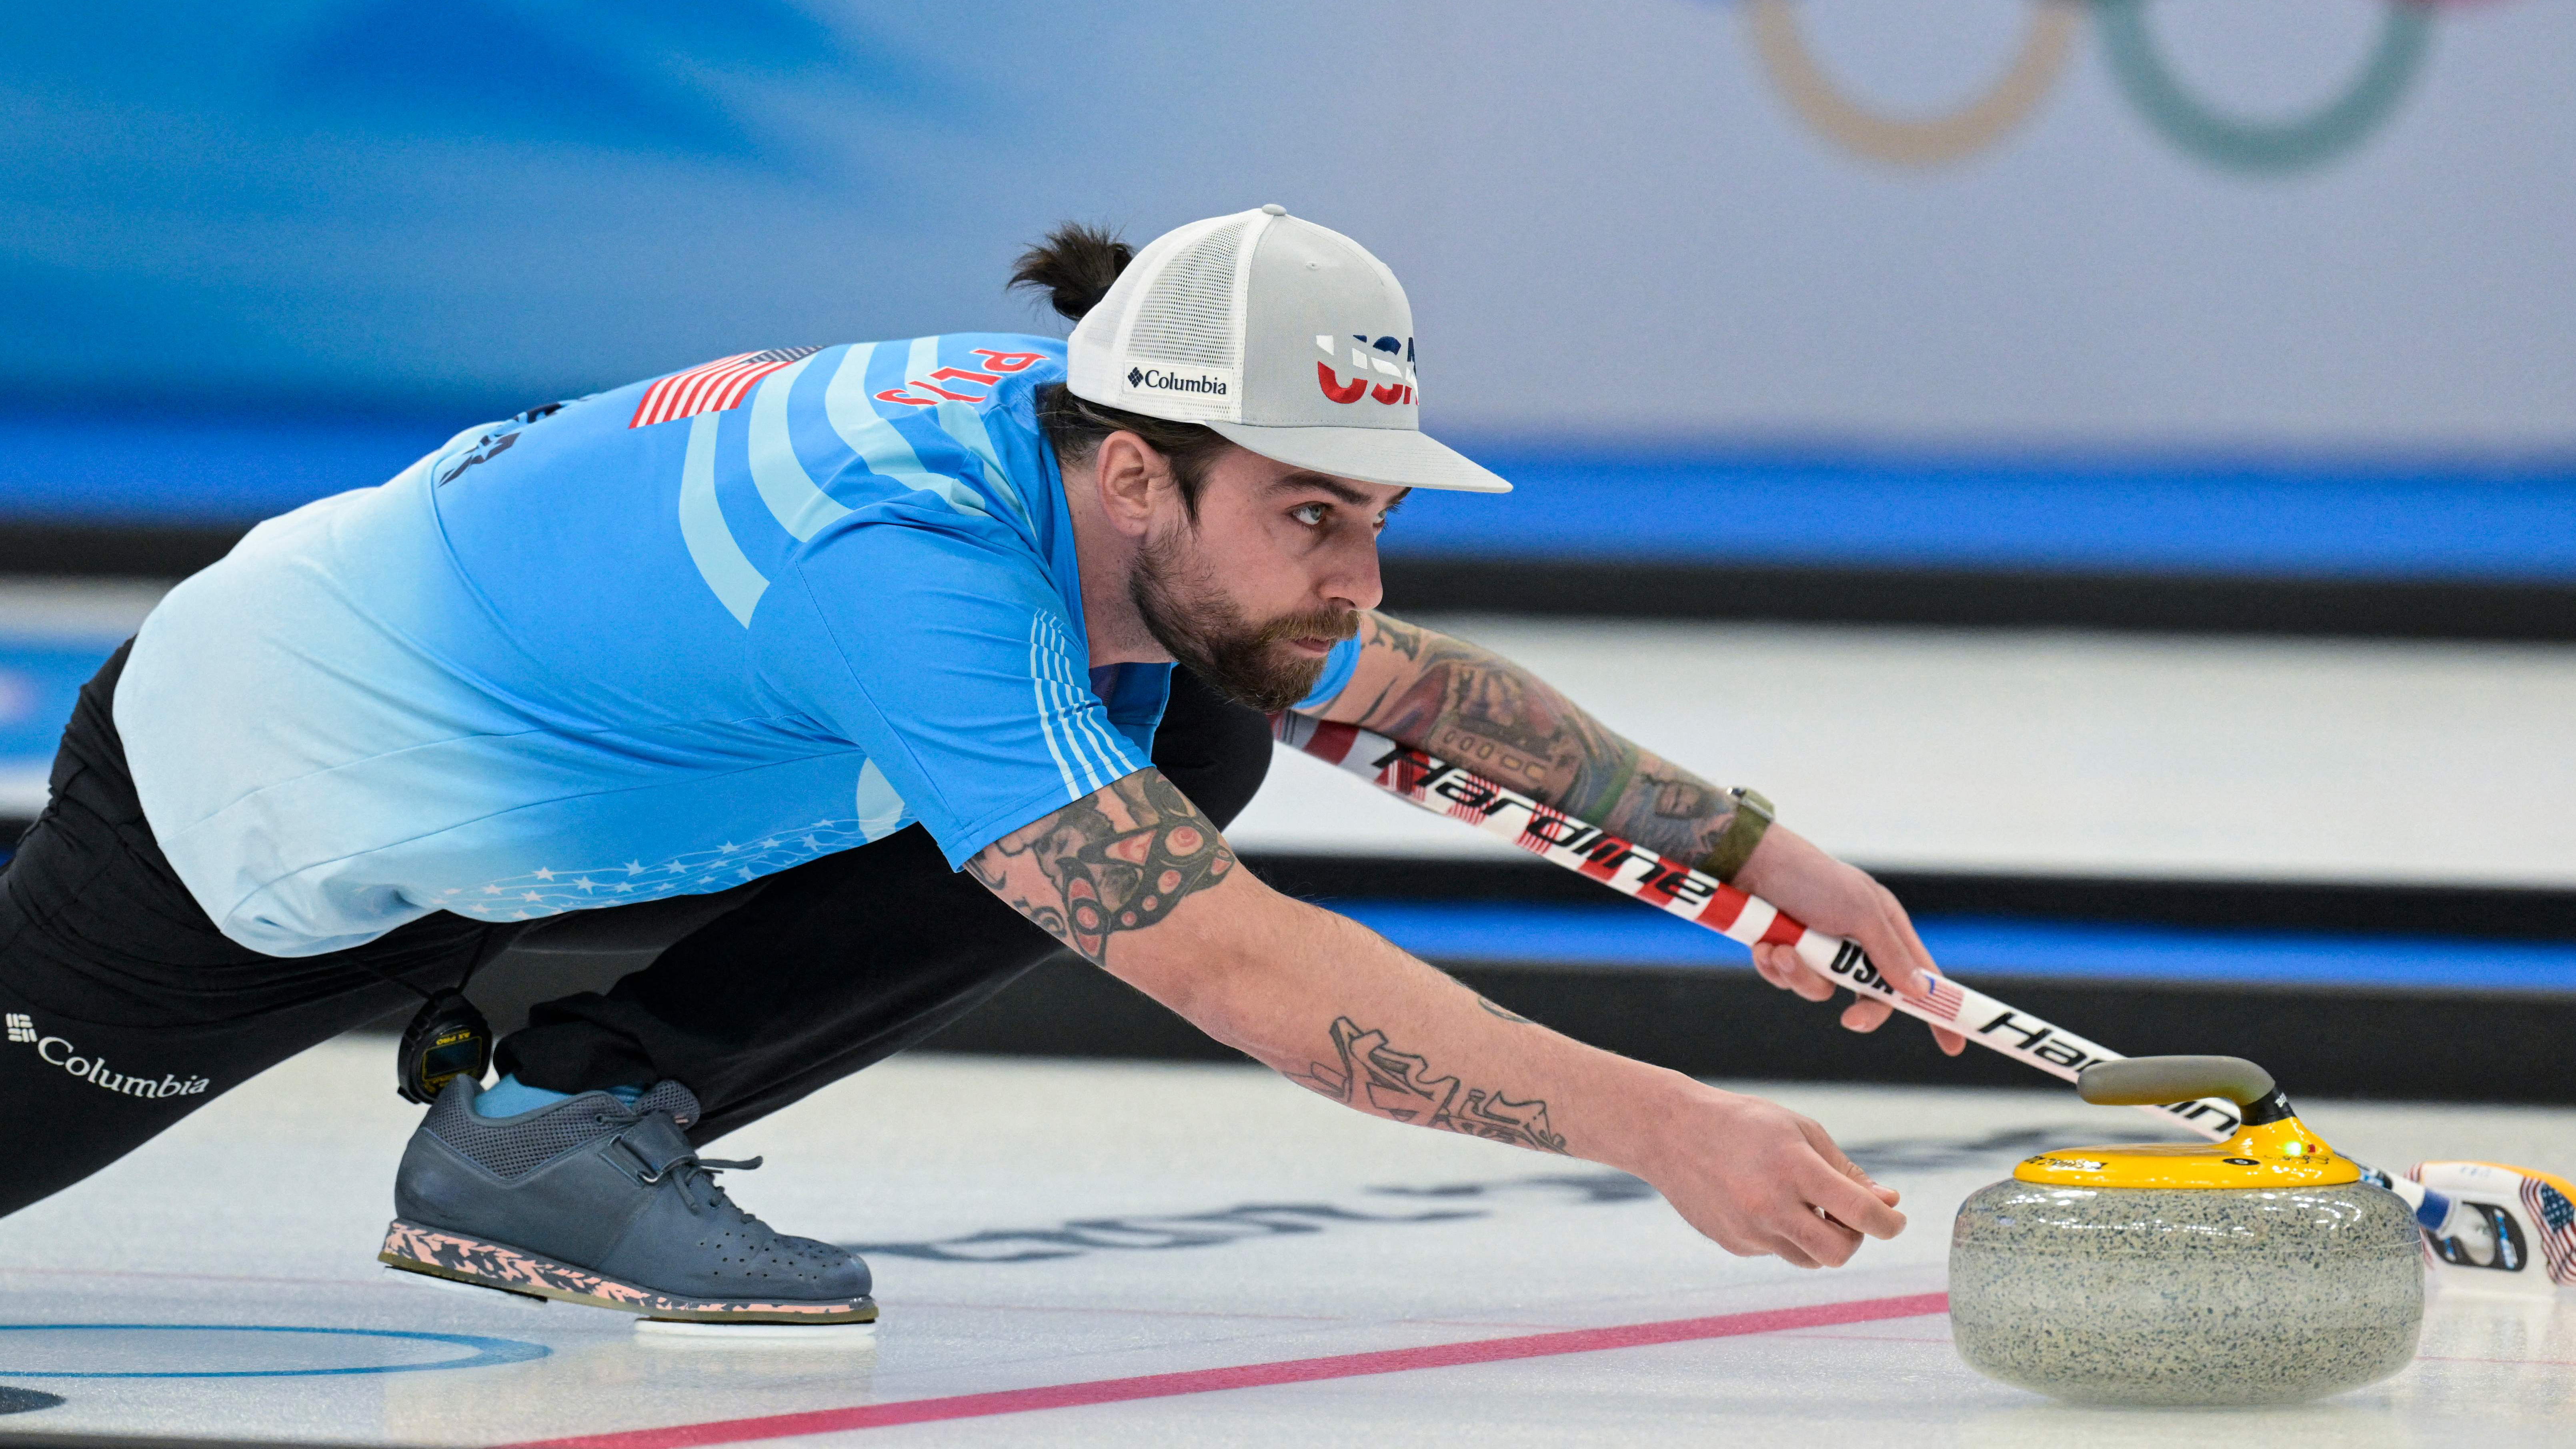 Team USA Falls to Italy in Second Match of Mixed Doubles Curling Competition